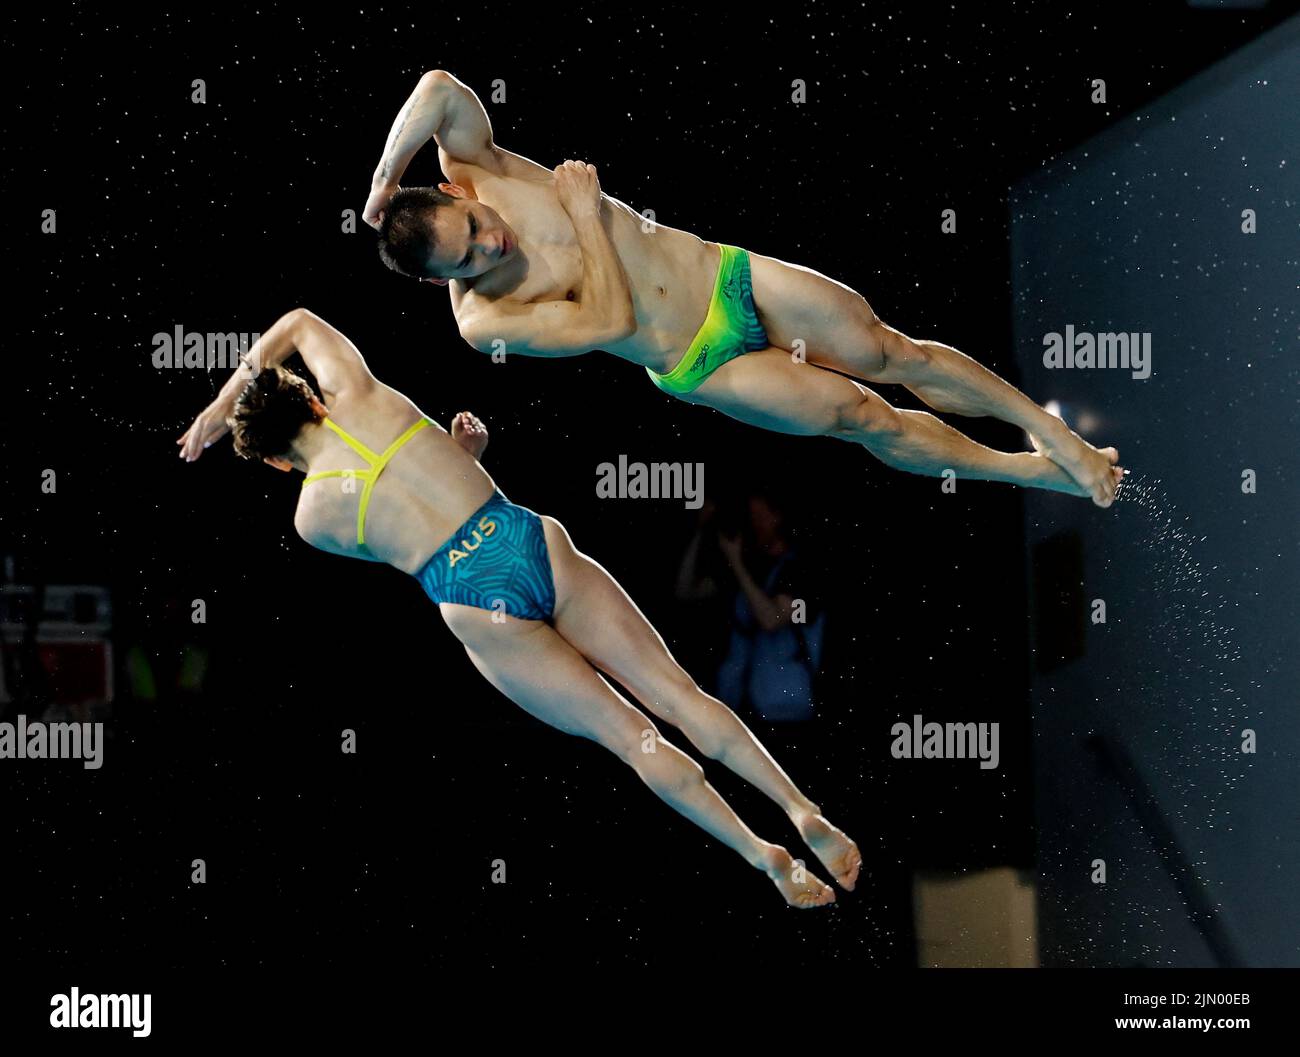 Commonwealth Games - Diving - Mixed Synchronised 3m Springboard - Final - Sandwell Aquatics Centre, Birmingham, Britain - August 8, 2022 Australia's Maddison Keeney and Shixin Li in action REUTERS/Stefan Wermuth Stock Photo